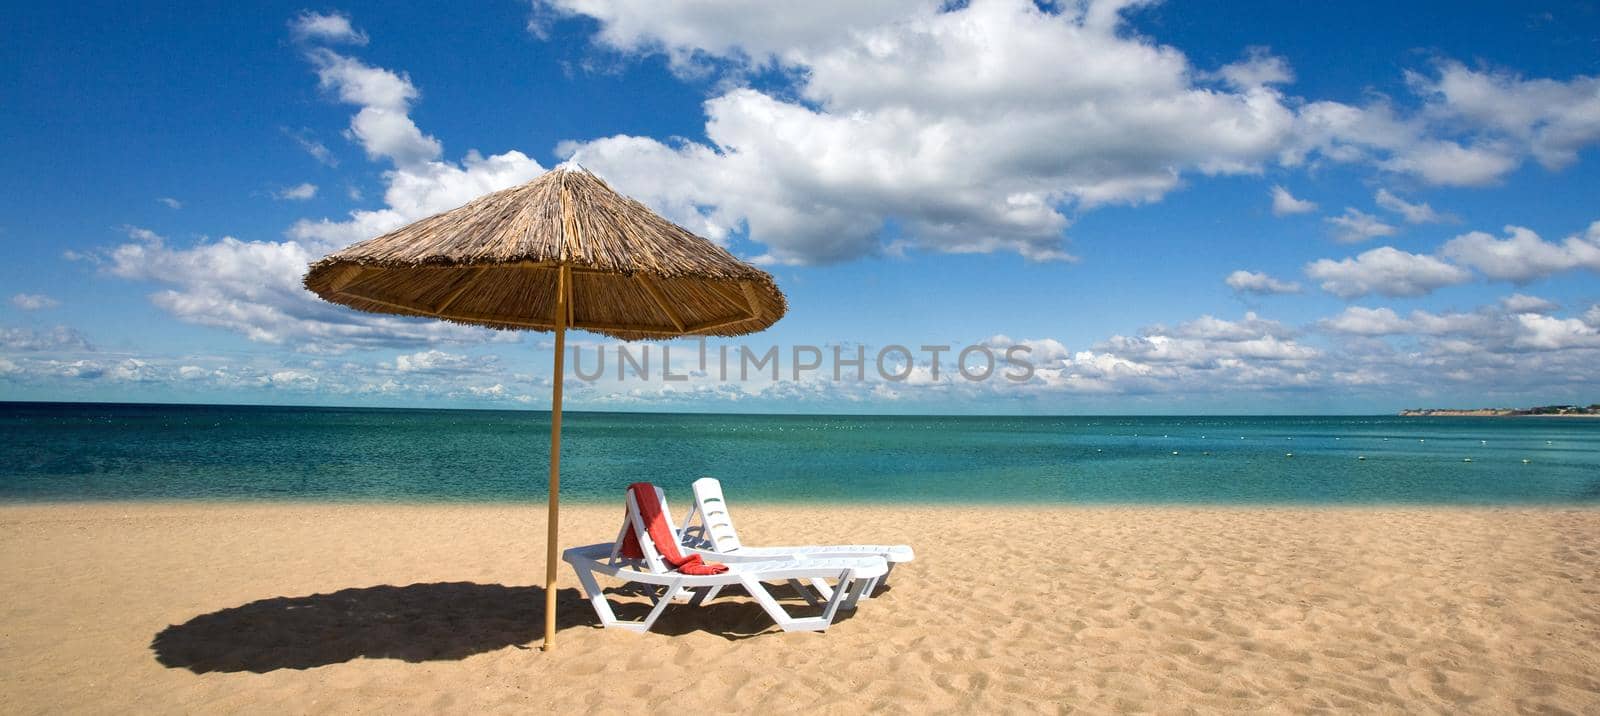 An attractive image of two chairs and umbrella on the beach